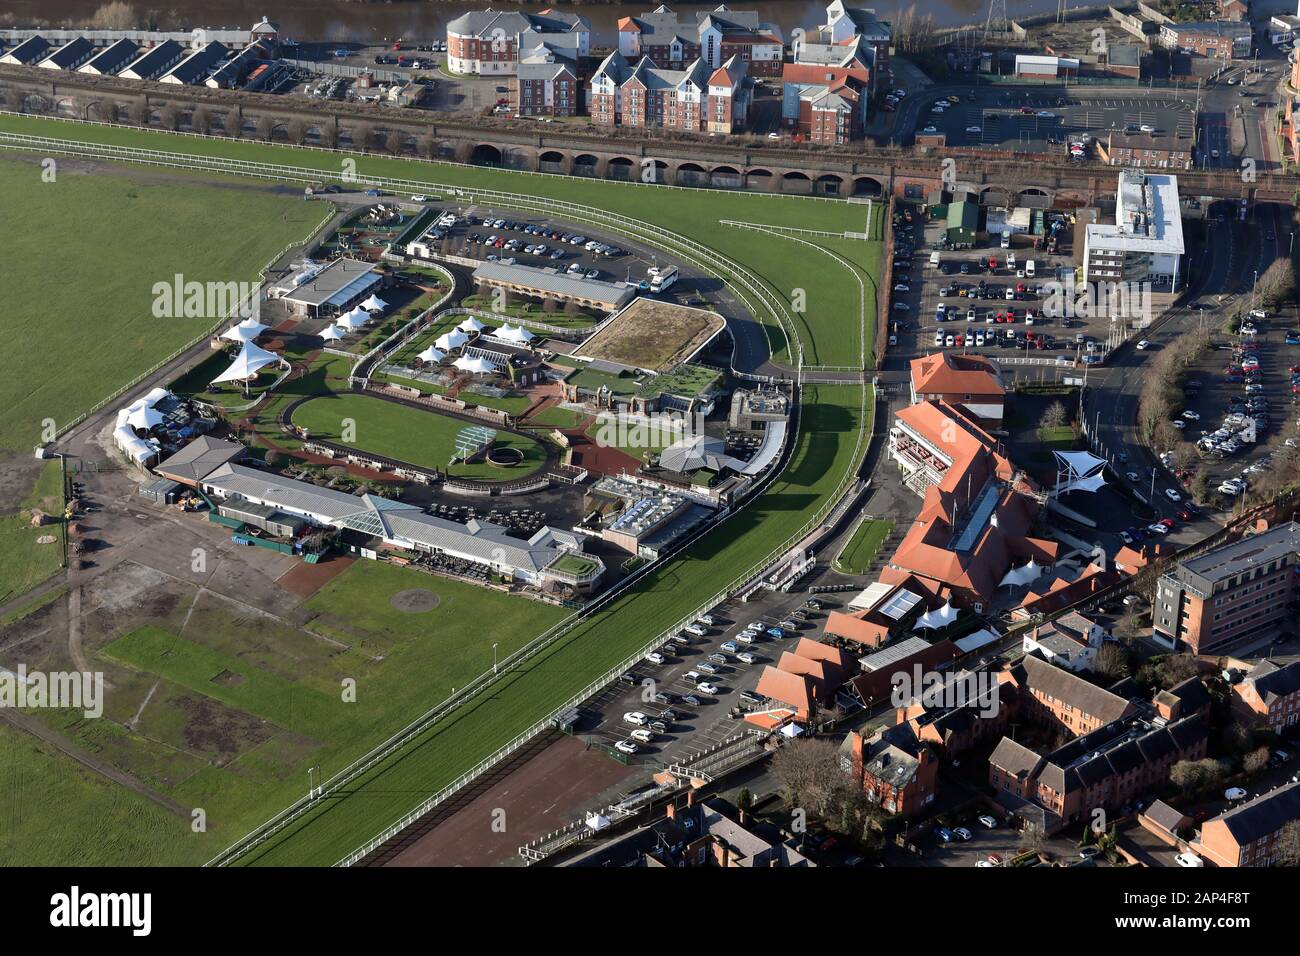 aerial view of the stands, paddock & parade ring of Chester Racecourse, UK Stock Photo